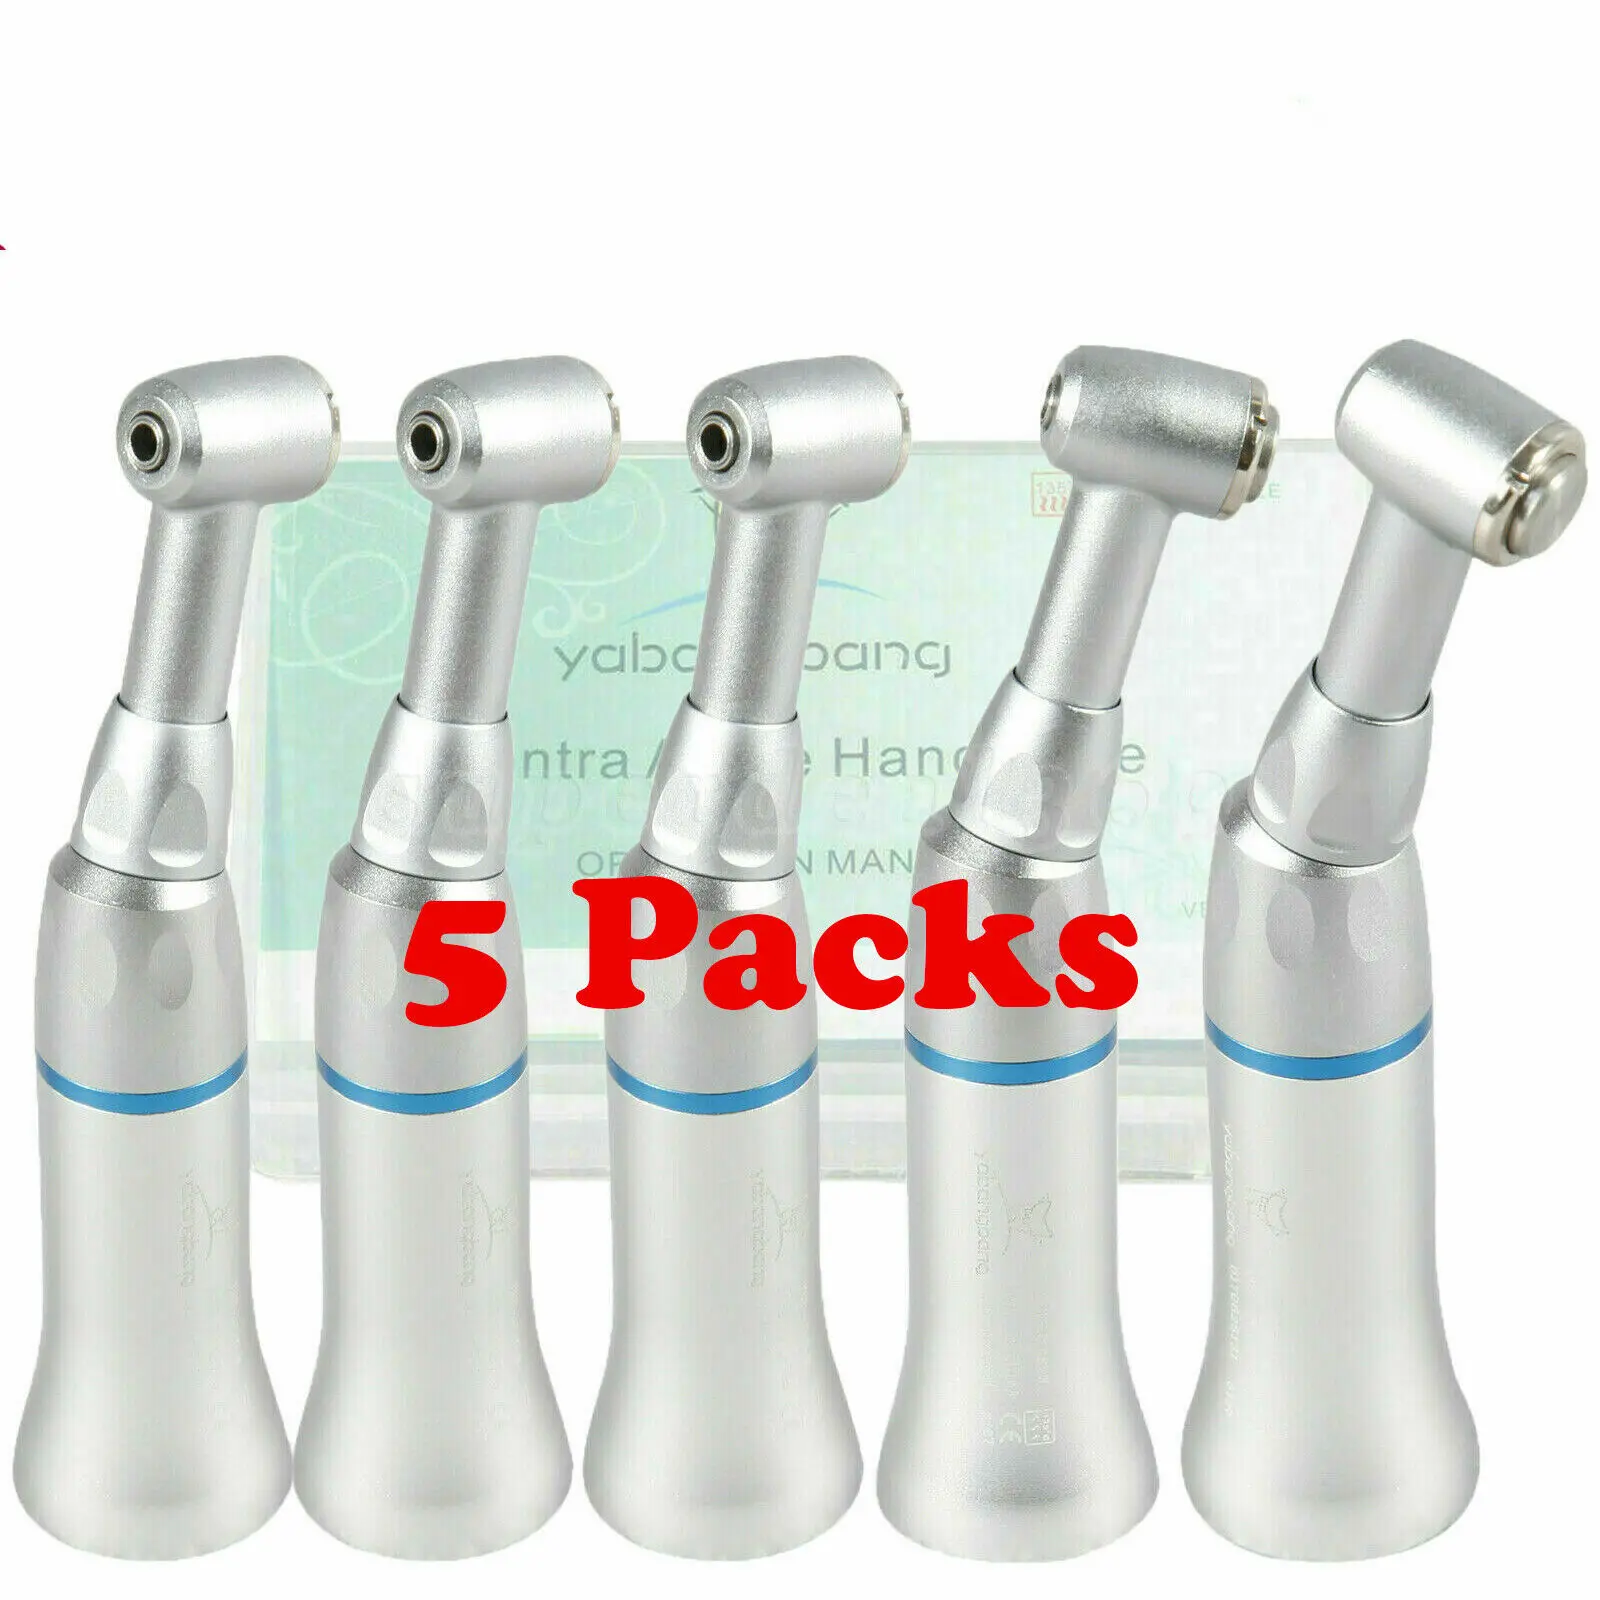 5PCS*NSK Style Dental Low Slow Speed Contra Angle Handpiece Push Button Turbine For E-type Motors